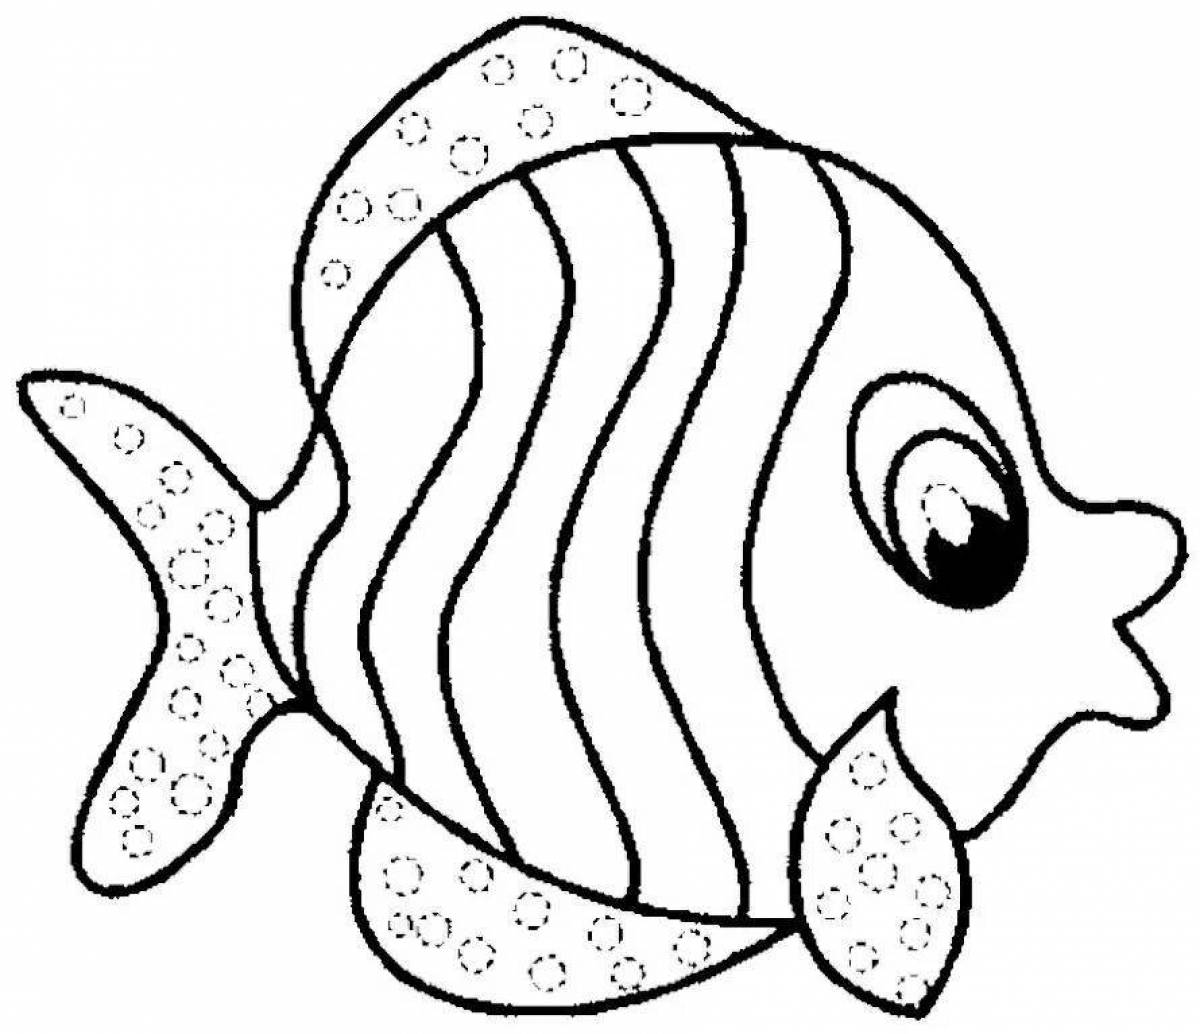 Coloring book gorgeous fish